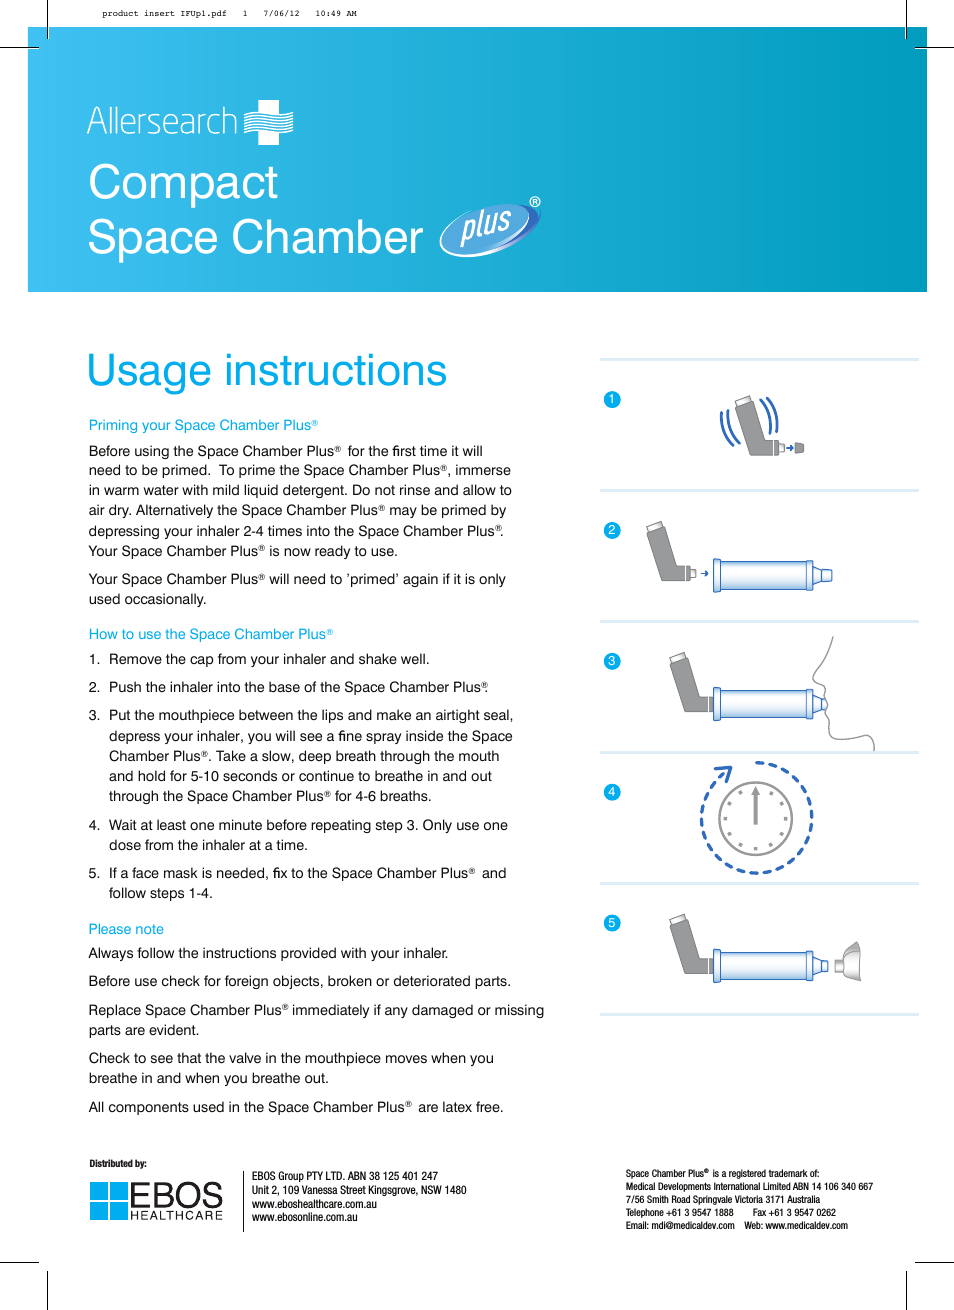 Compact Space Chamber Plus